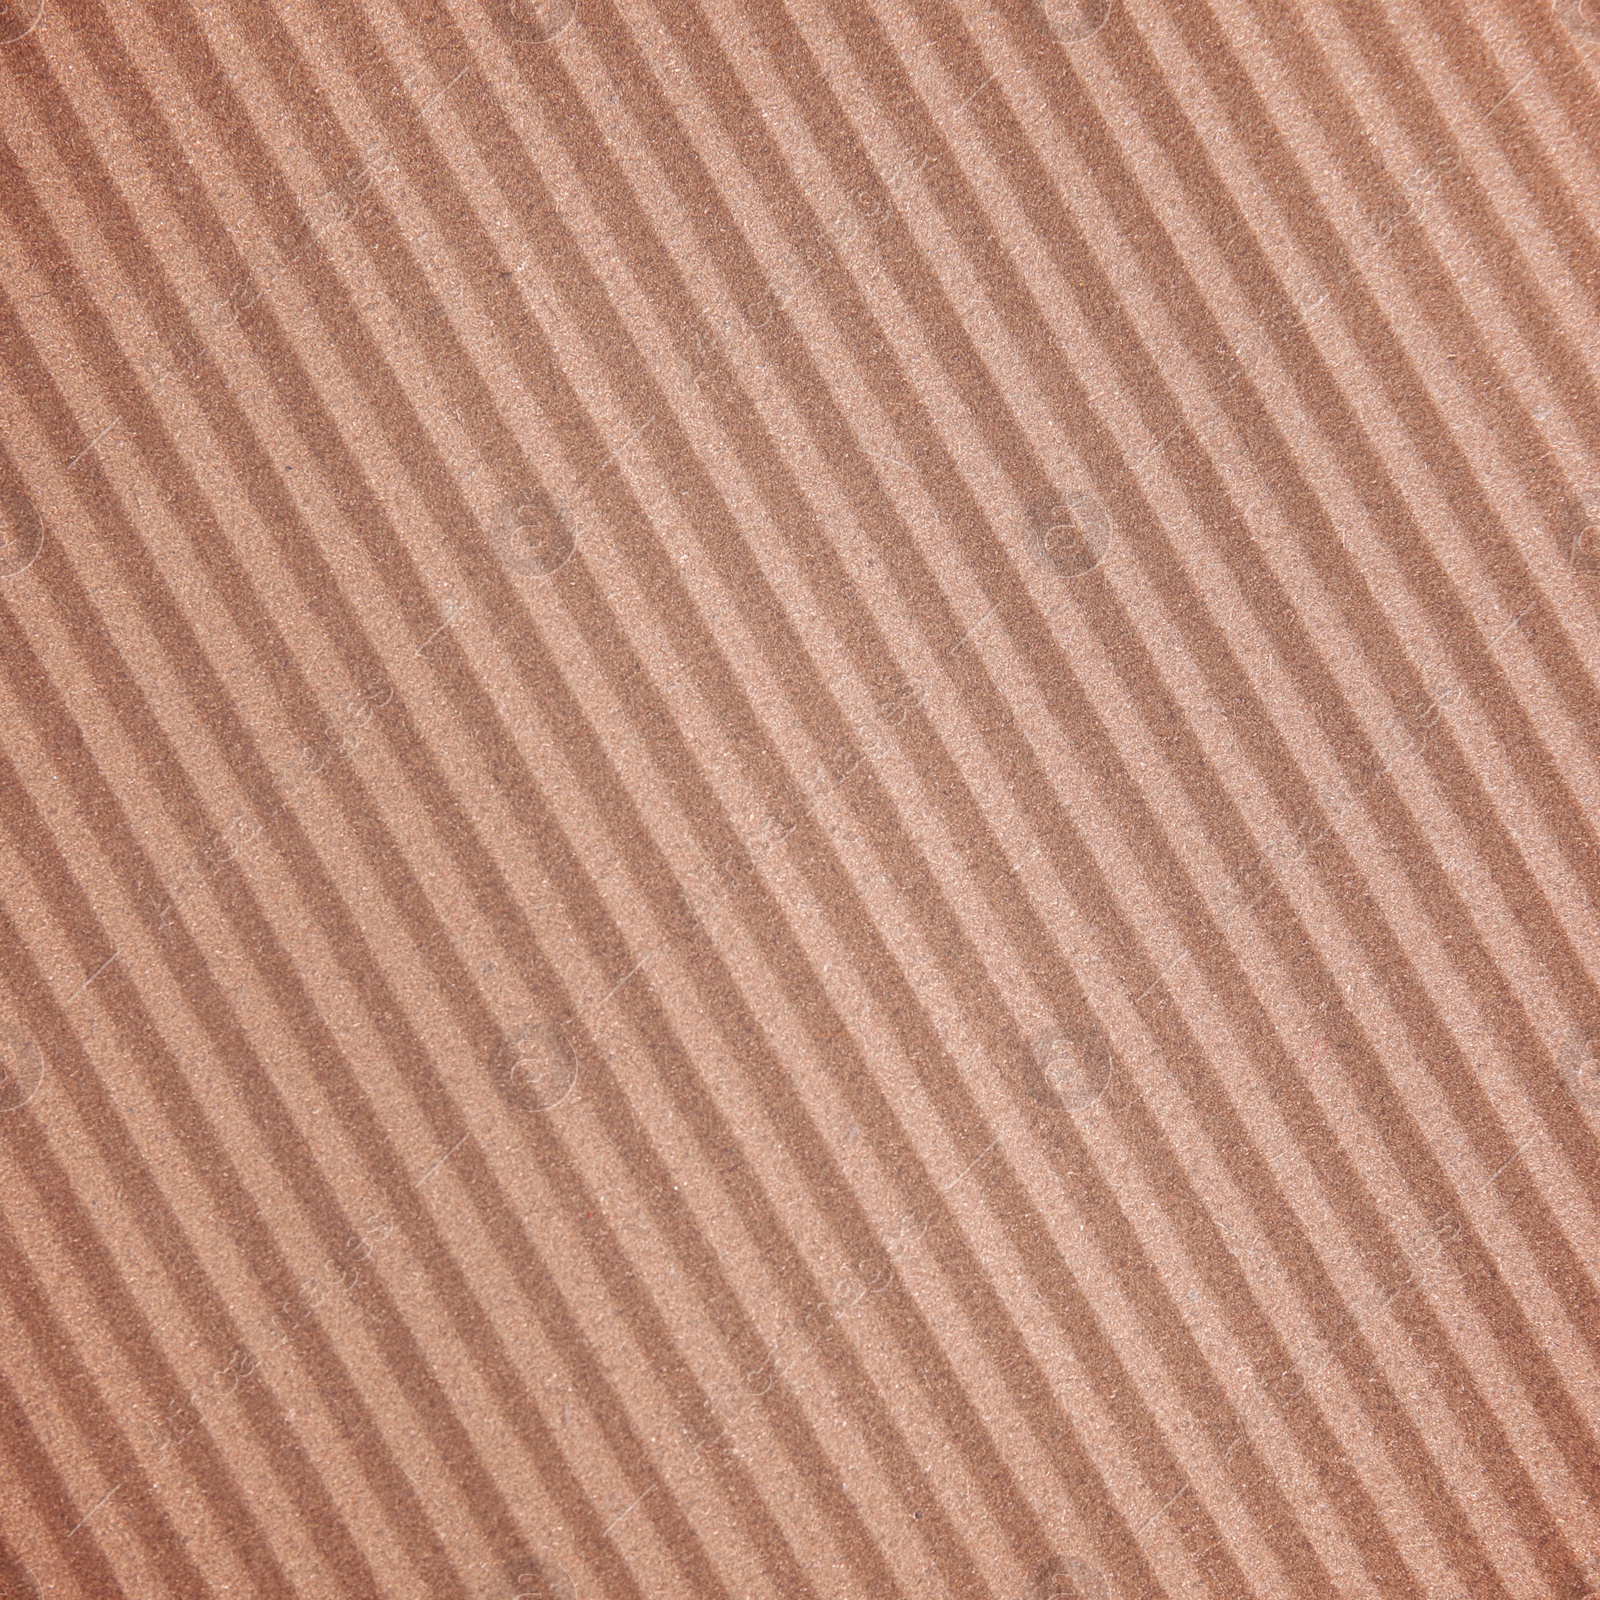 Image of Wall paper design. Brown corrugated sheet of cardboard as background